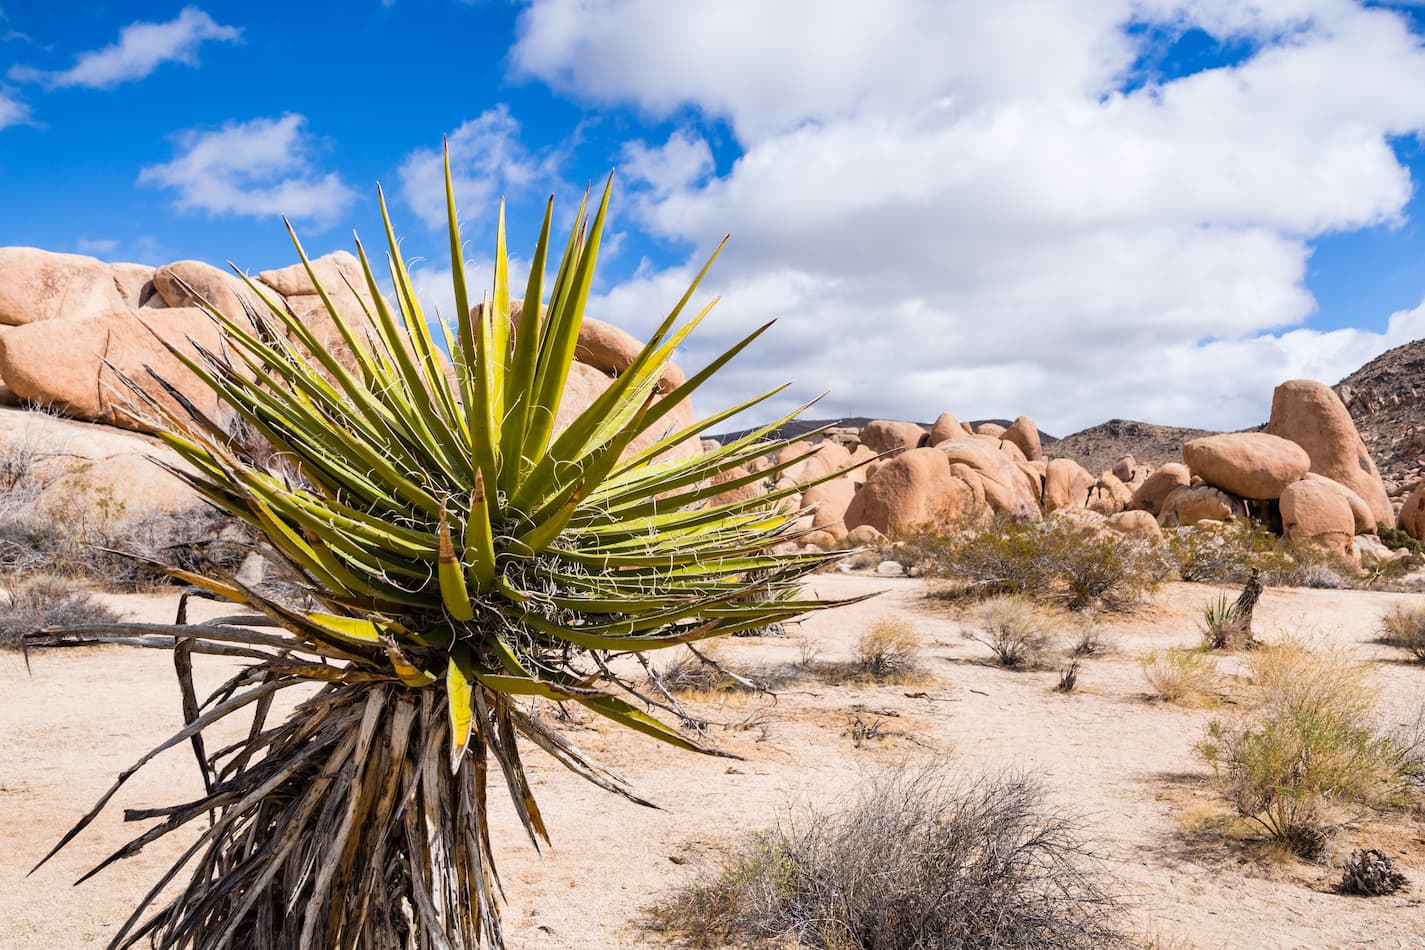 An image of a Mojave Yucca (Yucca schidigera); rocky outcrop in the background, Joshua Tree National Park, California.